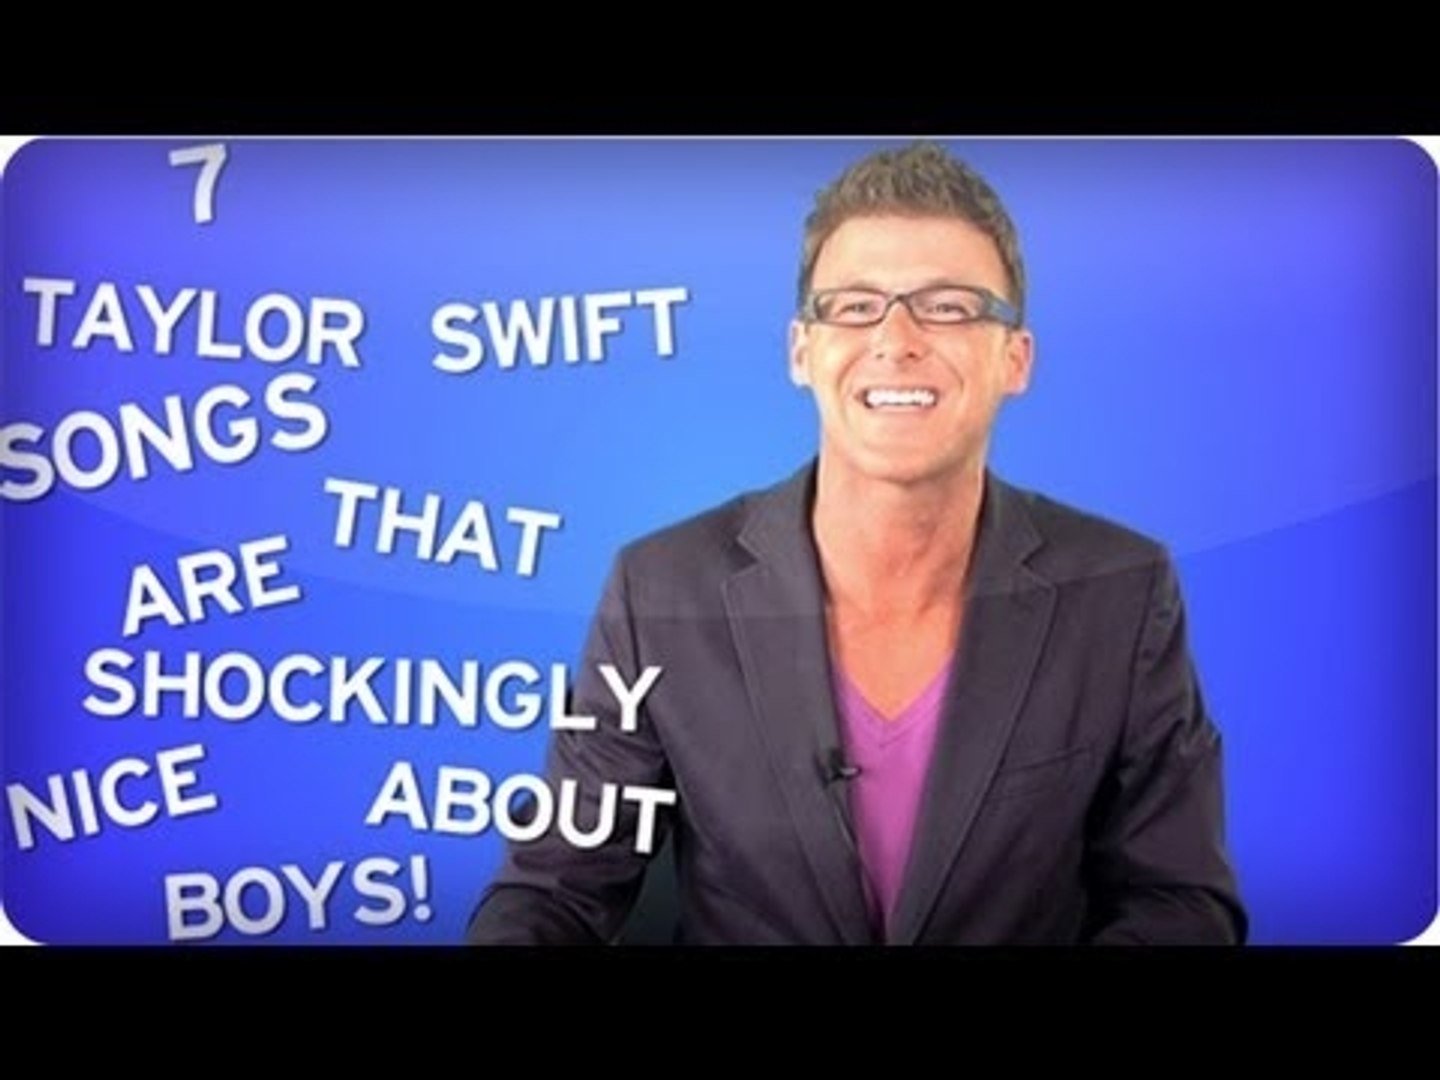 7 Taylor Swift Songs That Are Shockingly Nice About Boys - ISHlist 26